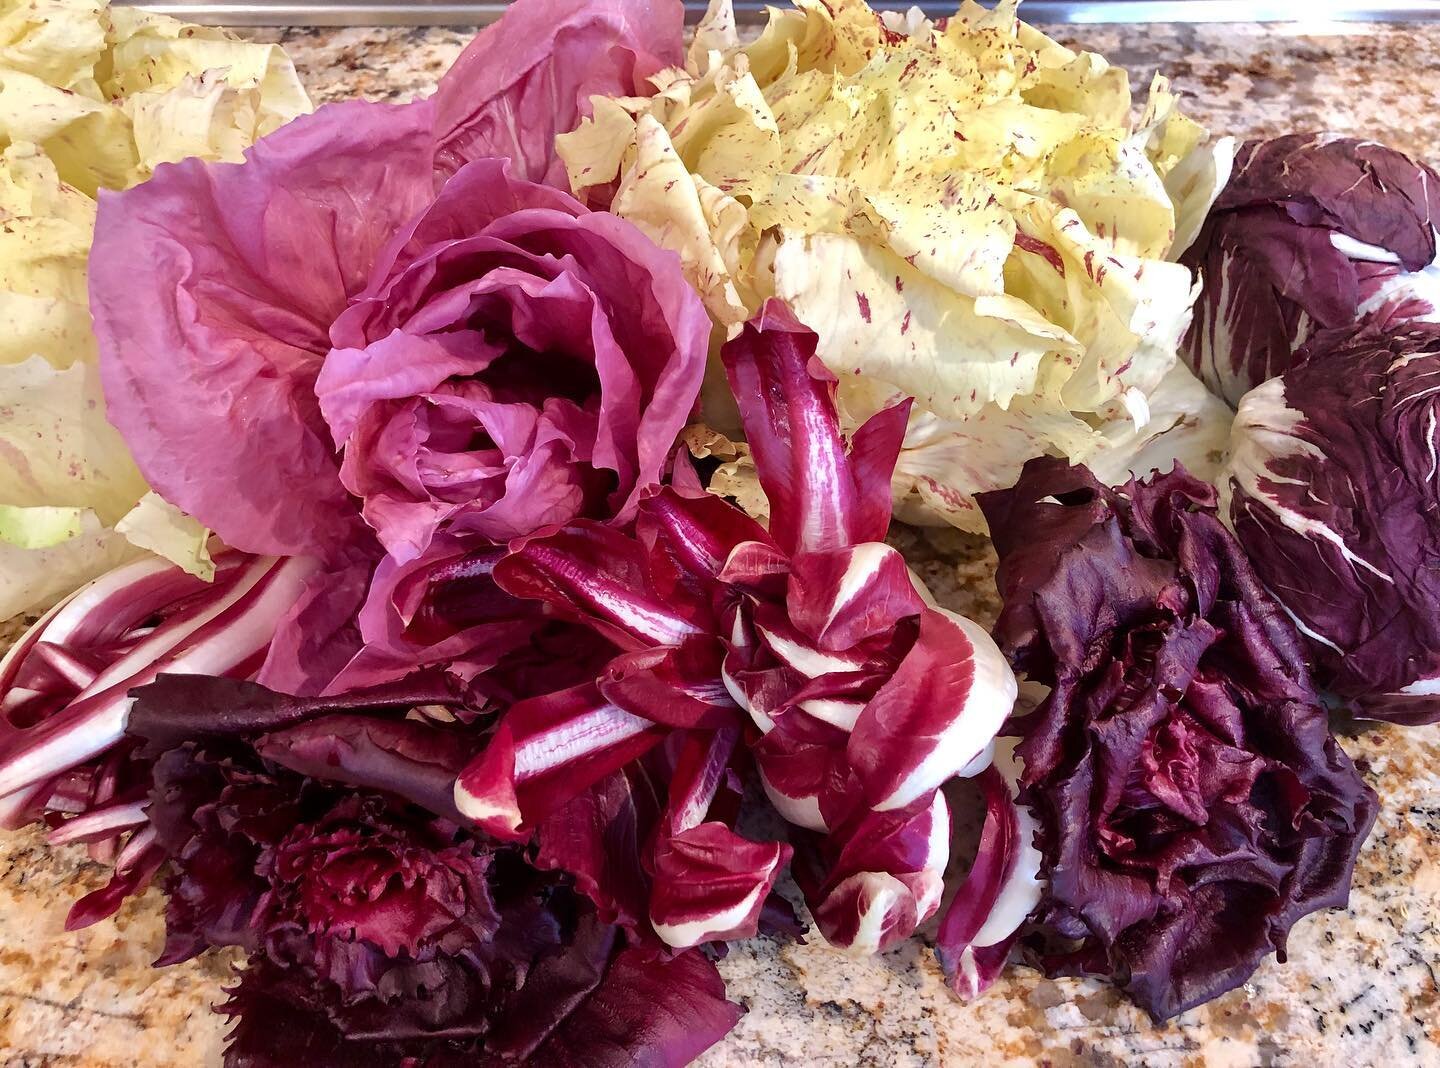 Stunning varieties of Radicchio. Doesn&rsquo;t this make you want to create a wonderful salad? Add some fennel, orange segments,  extra virgin olive oil and your favorite vinegar and its perfect! Buono! @stressfreecook #cookingwithcolor #cookingathom